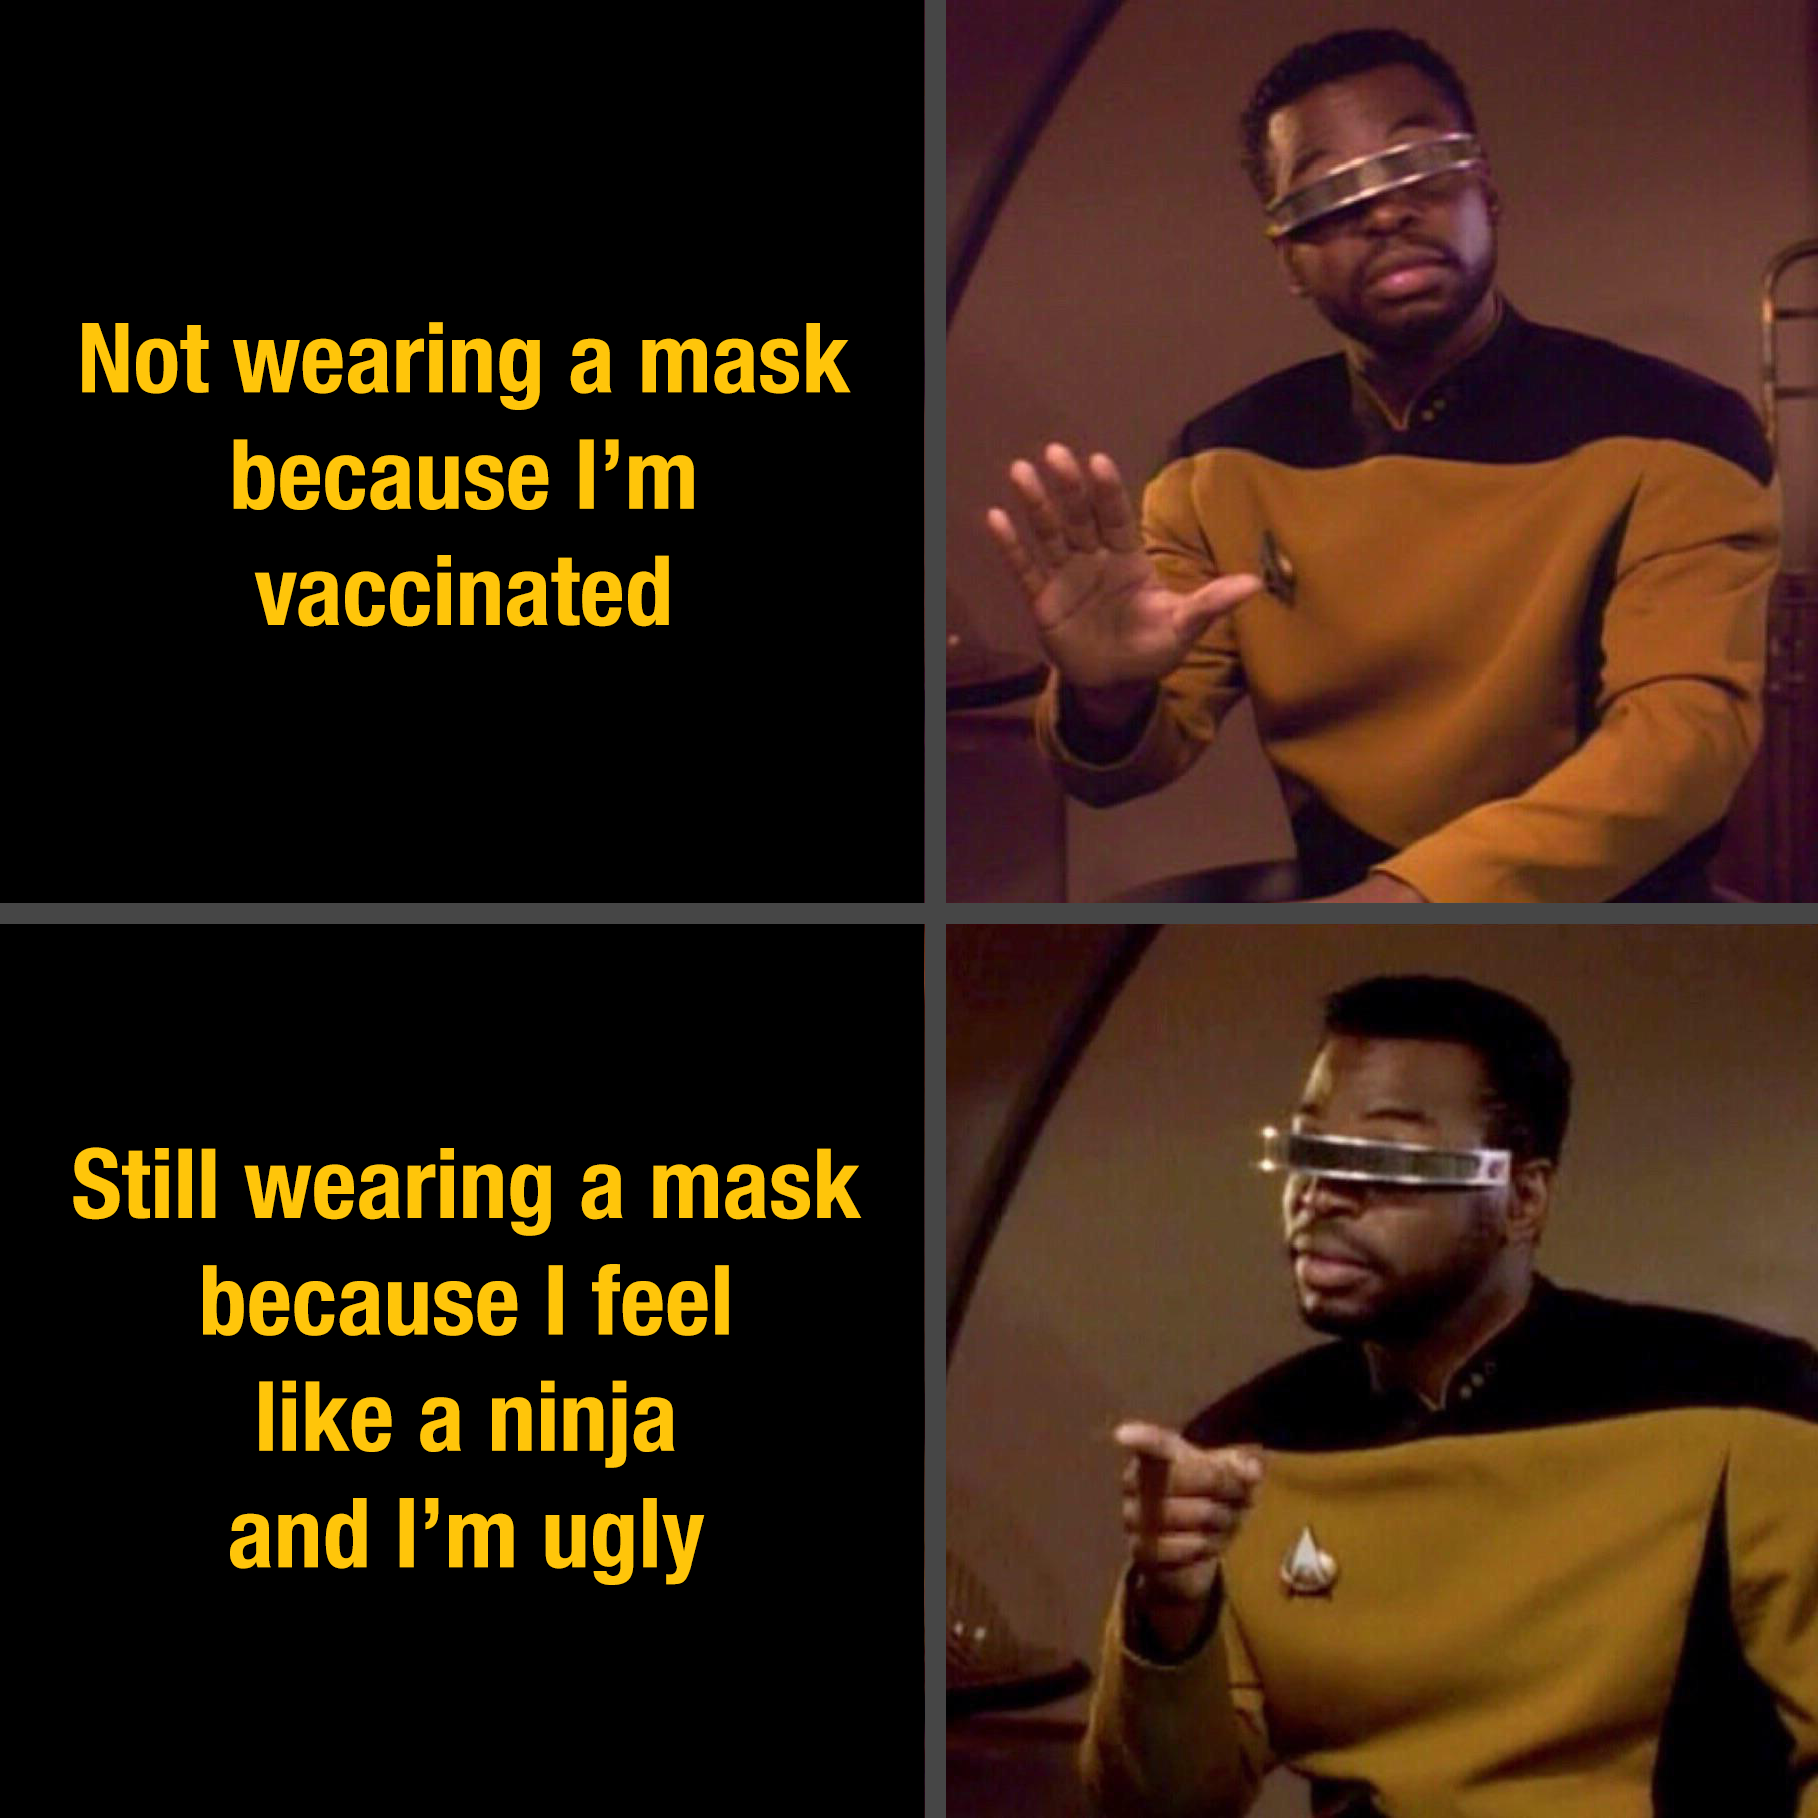 No one cared before I put on the mask